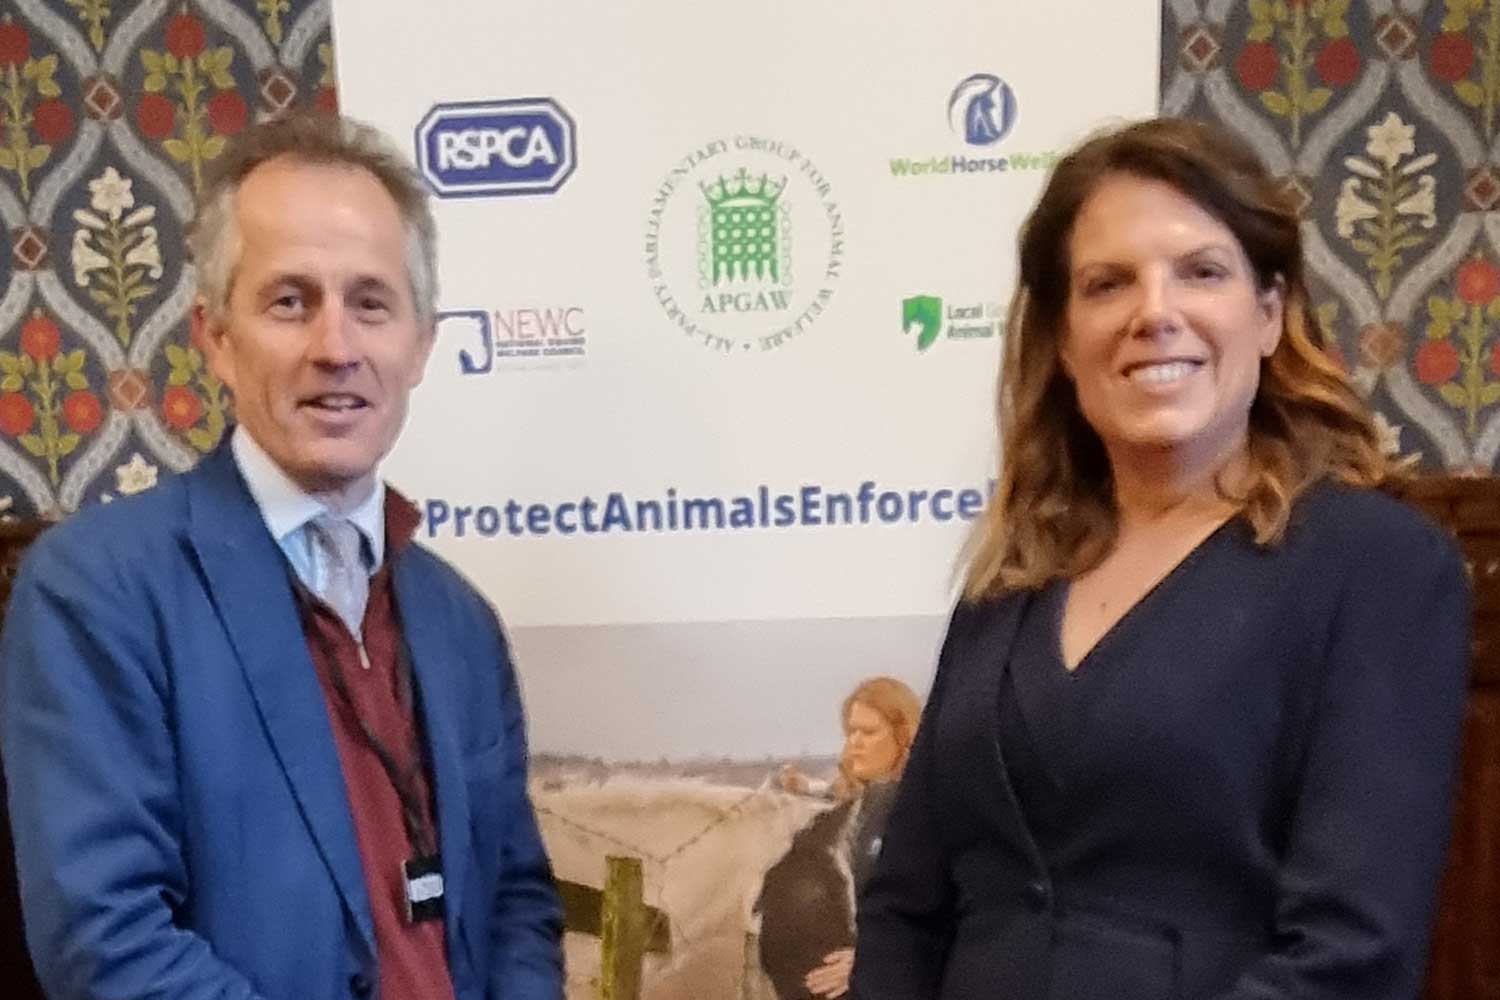 World Horse Welfare attend House of Commons animal welfare roundtable discussion